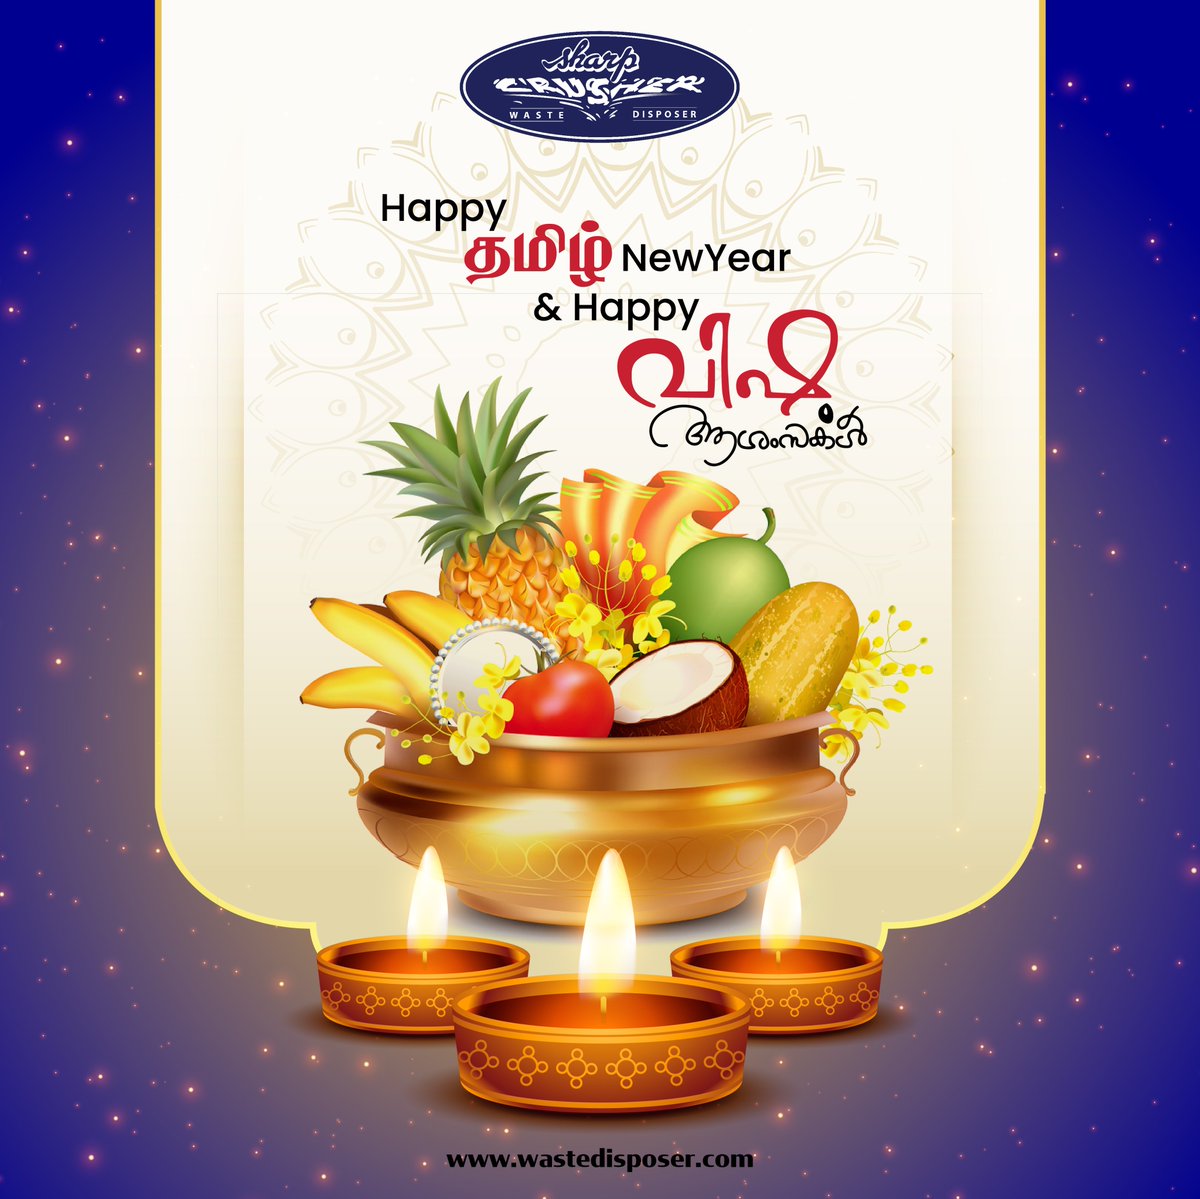 Let's make this year a memorable one filled with love, laughter, and good memories. Wishing you all a blessed year ahead!
.
.
#HappyTamilNewYear #tamilnewyear #celebrations #tamilnewyear2023 #TamilPuthanduVazhthukal #happyvishu #vishuasamsakal #WasteDisposer #SharpCrusher